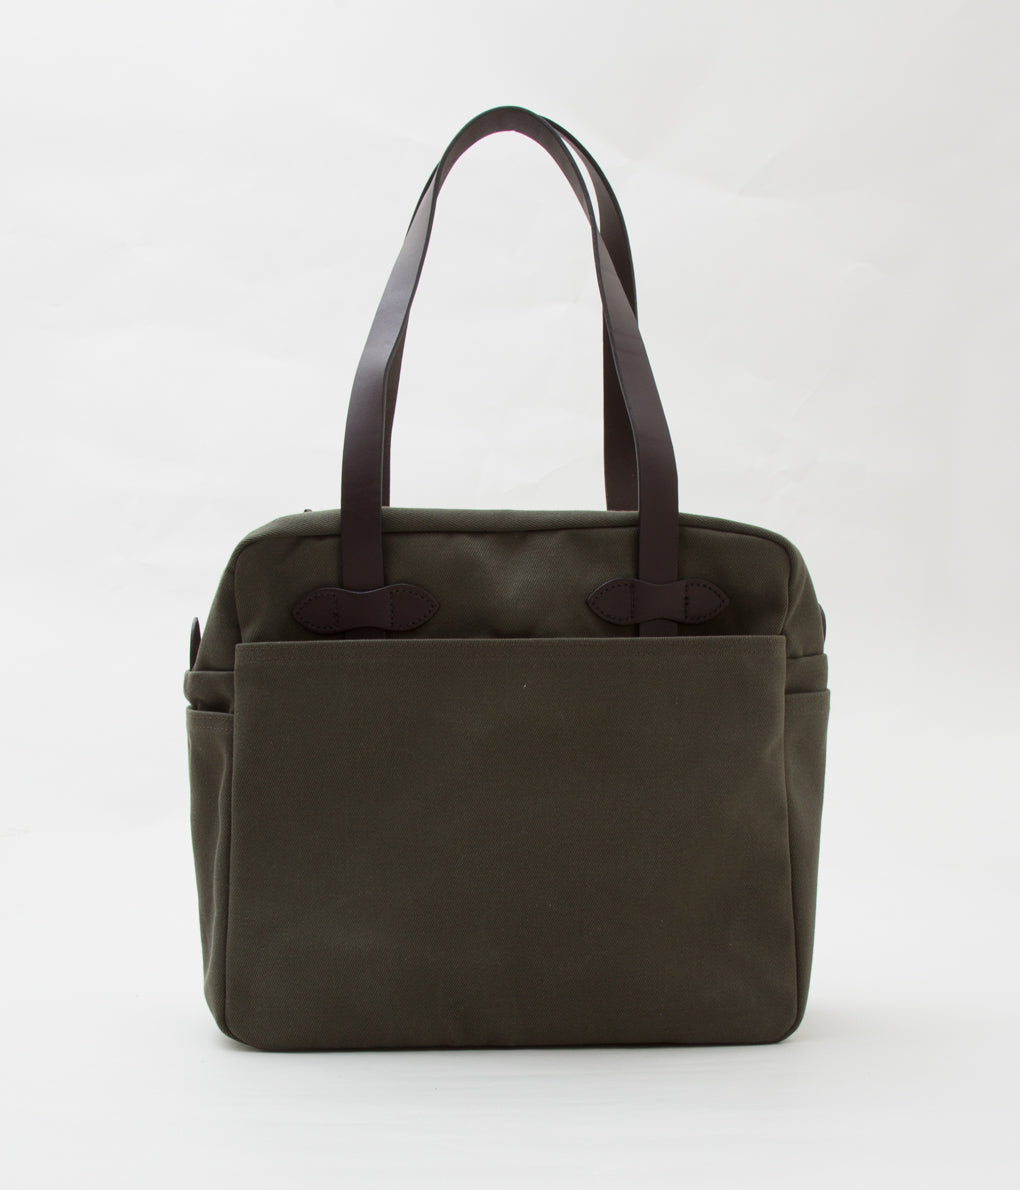 FILSON "TOTE BAG WITH ZIPPER" (OLIVE)